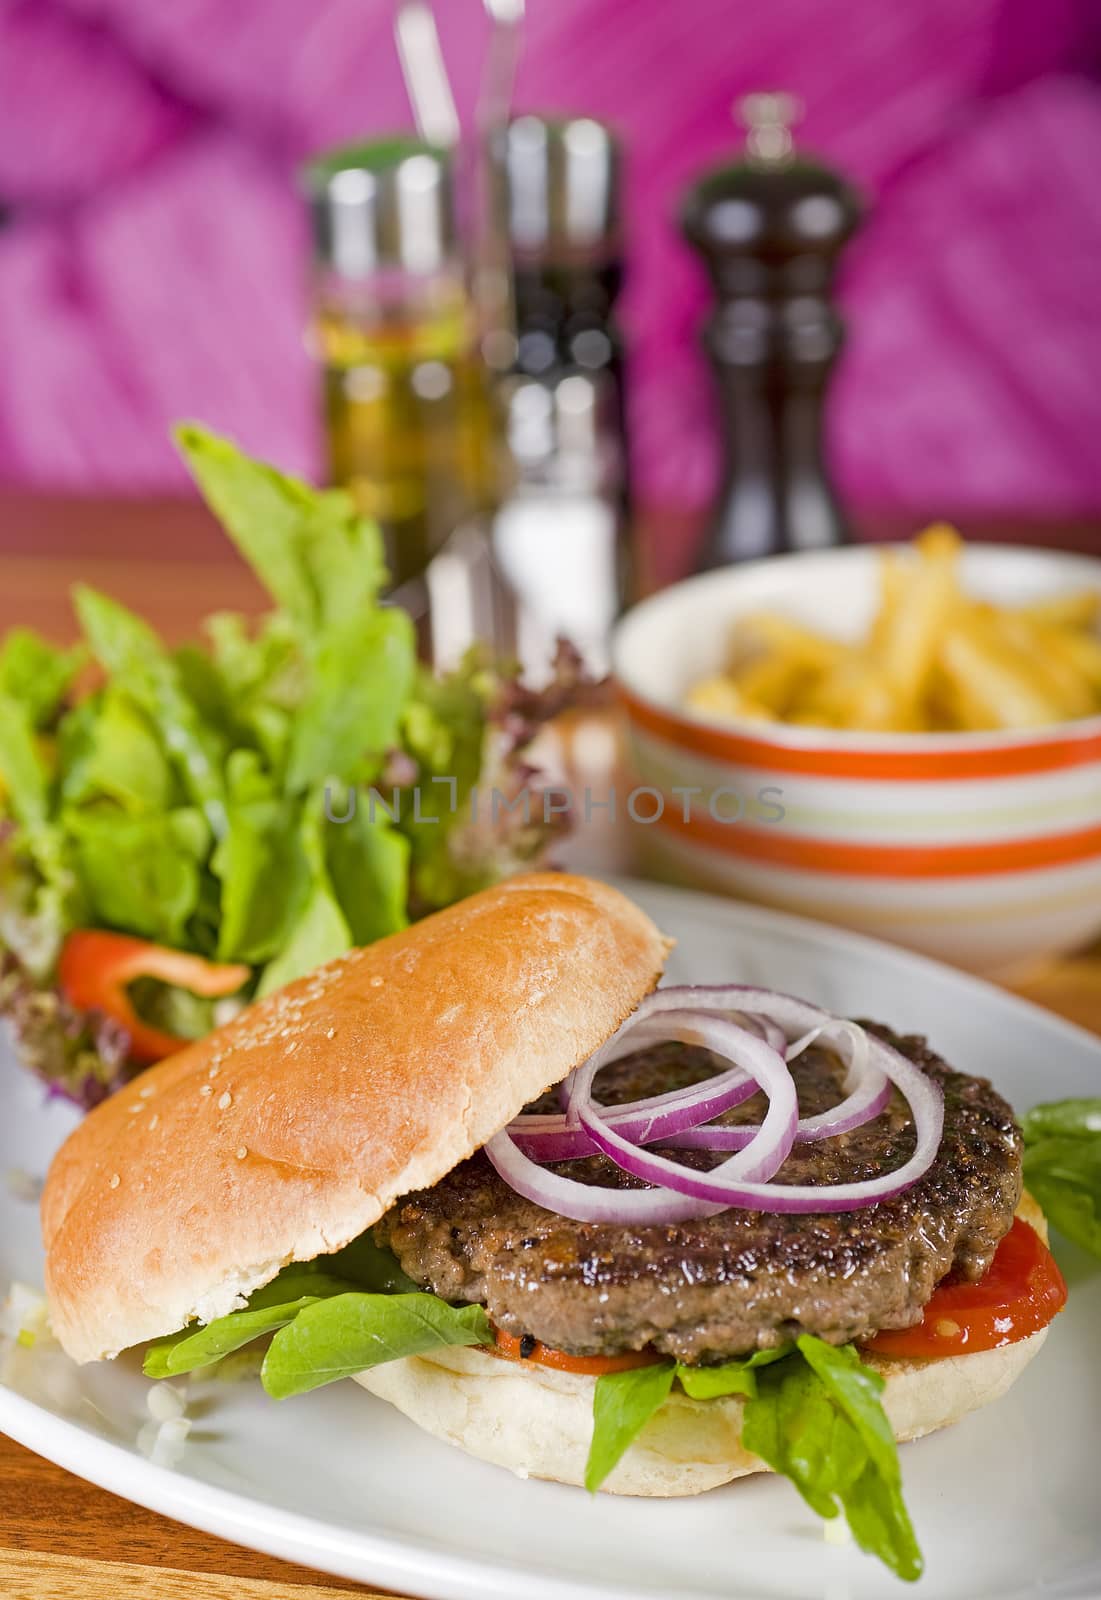 Beef burger in a bread bun with a salad